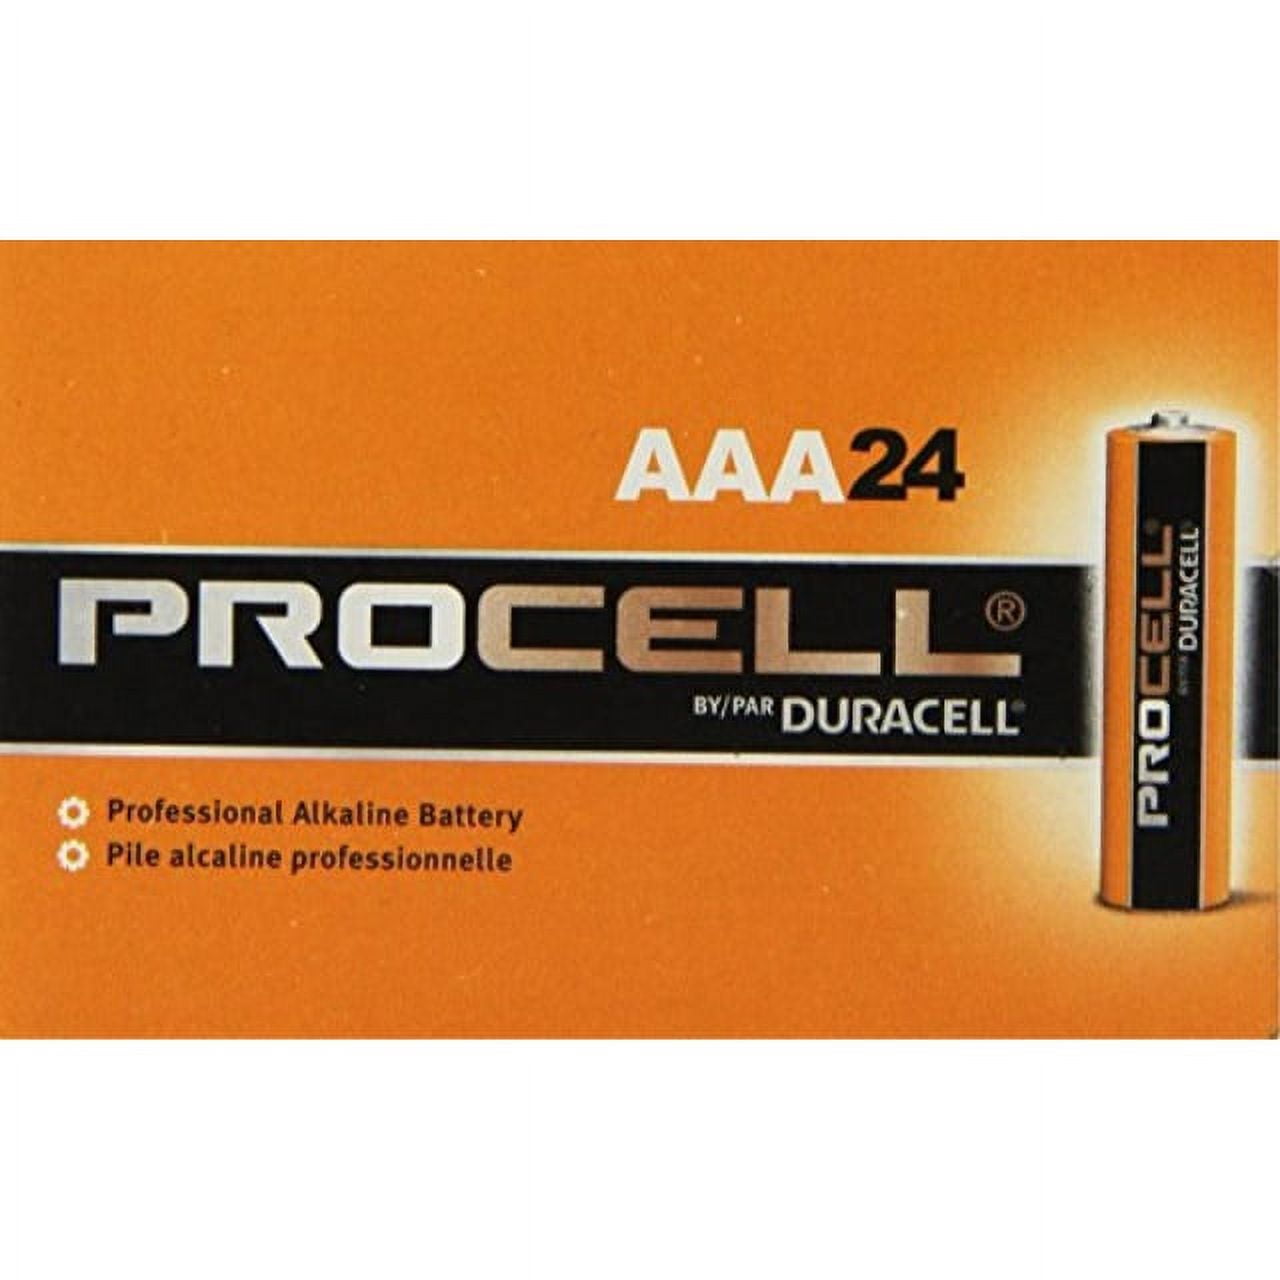 Duracell Procell-48 Battery Super Size Package- (Size-AAA) 